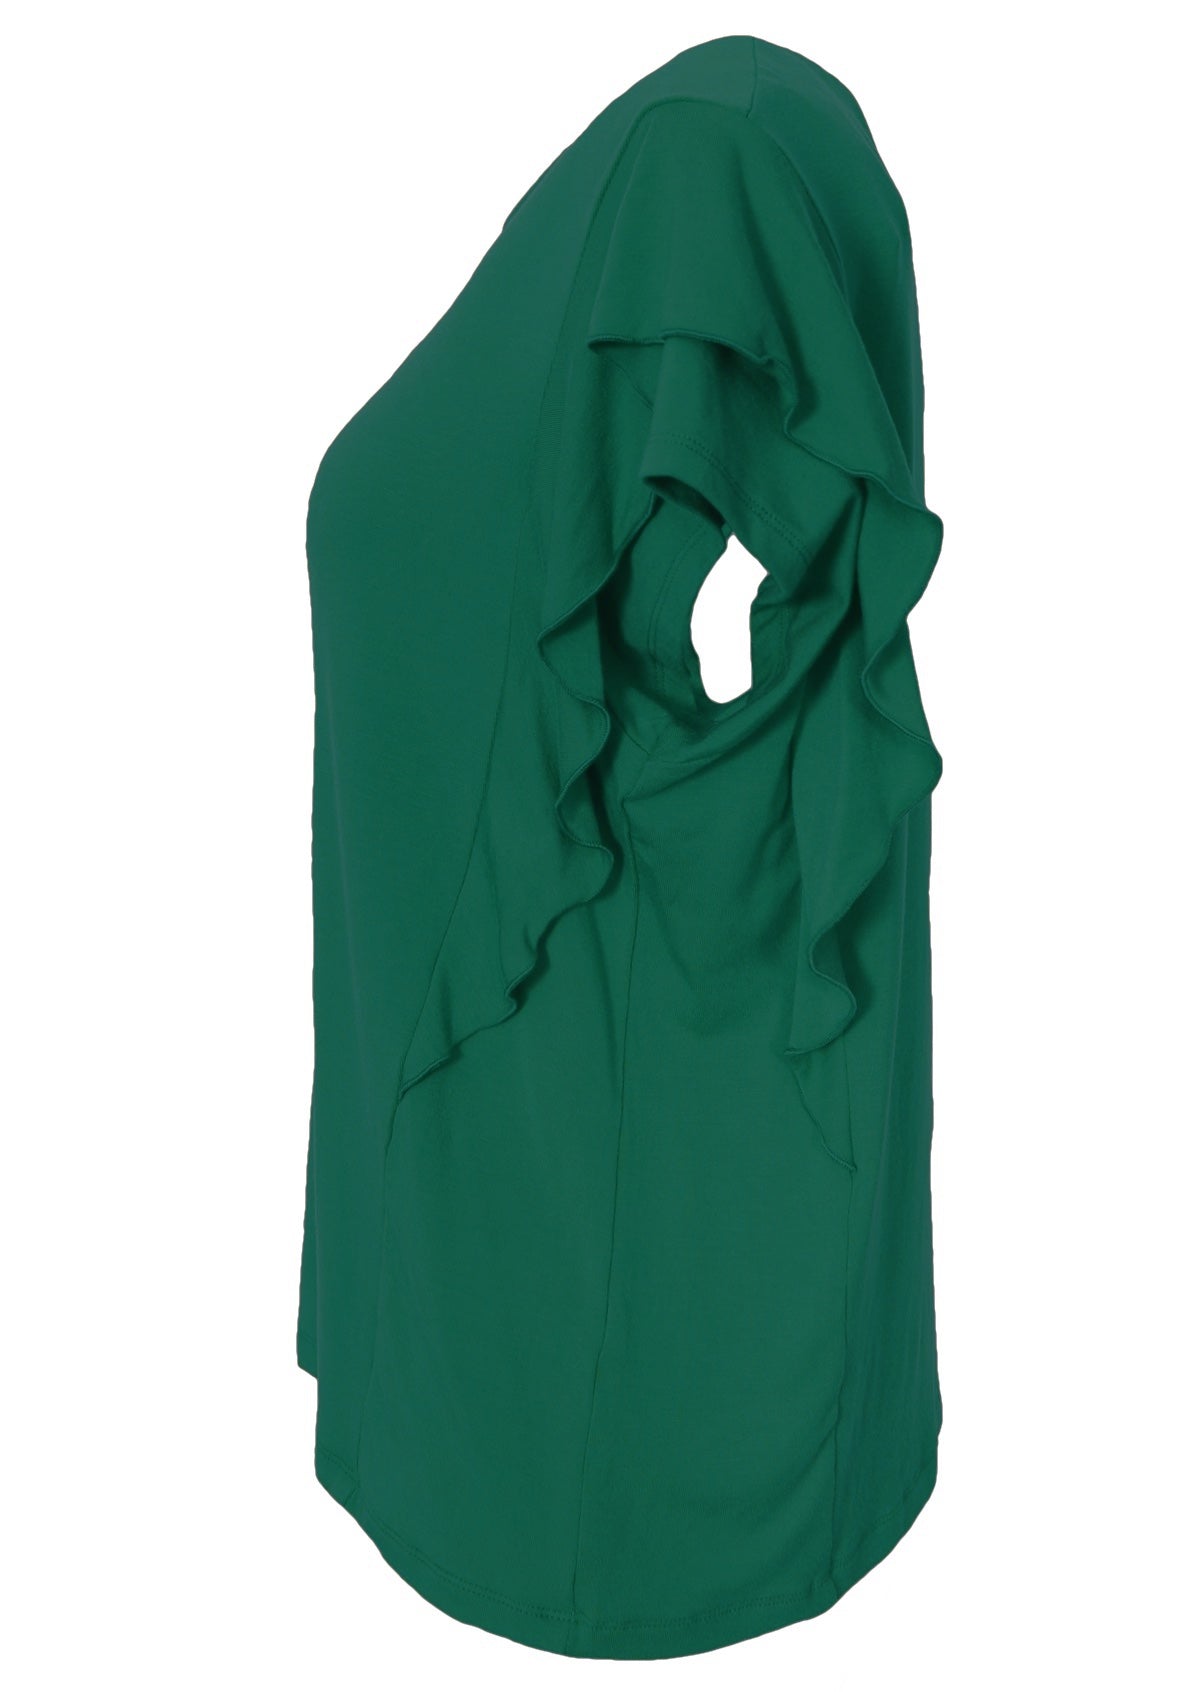 Side view of a ruffle green round neck rayon top.